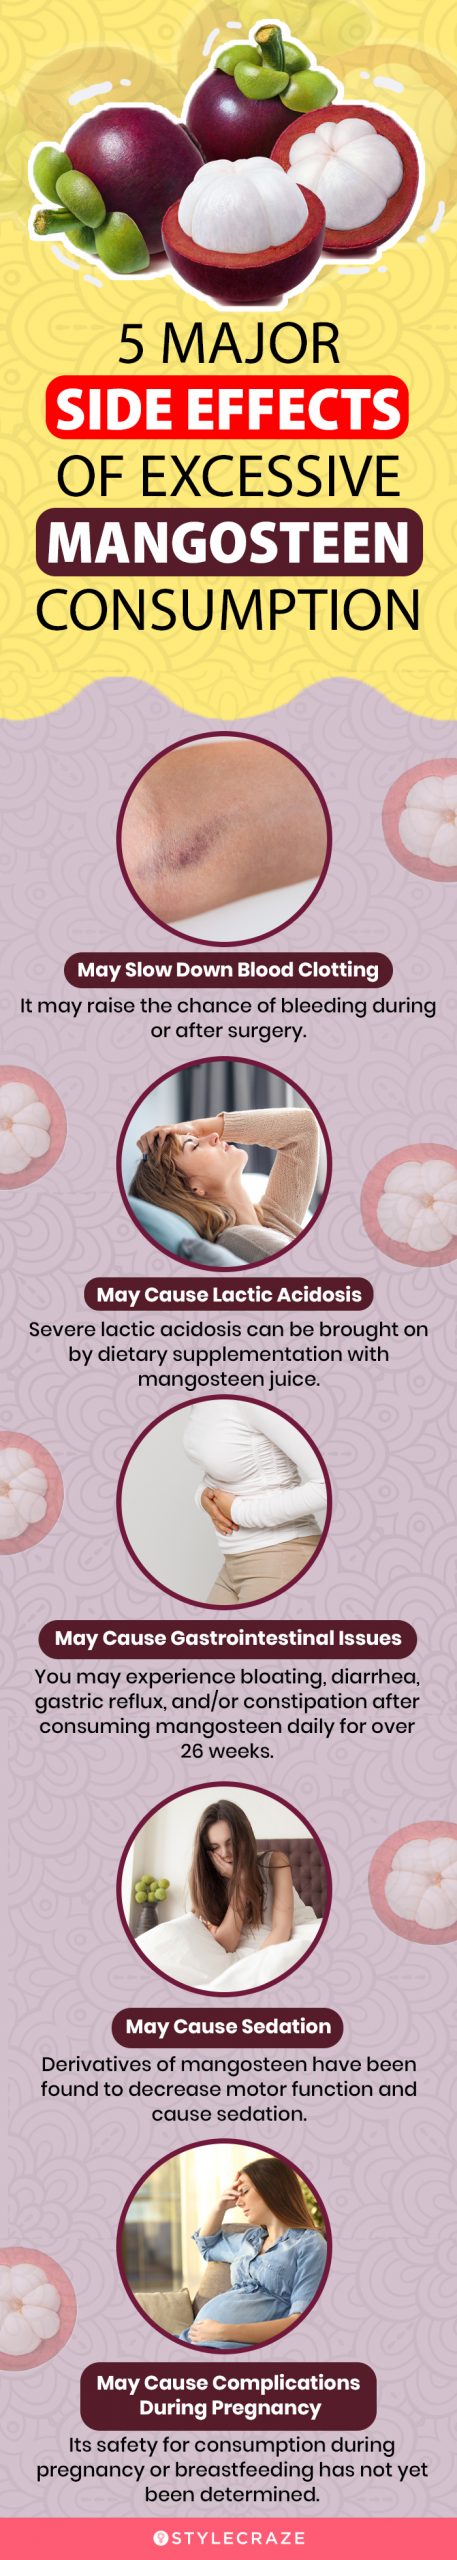 5 major side effects of excessive mangosteen consumption (infographic)